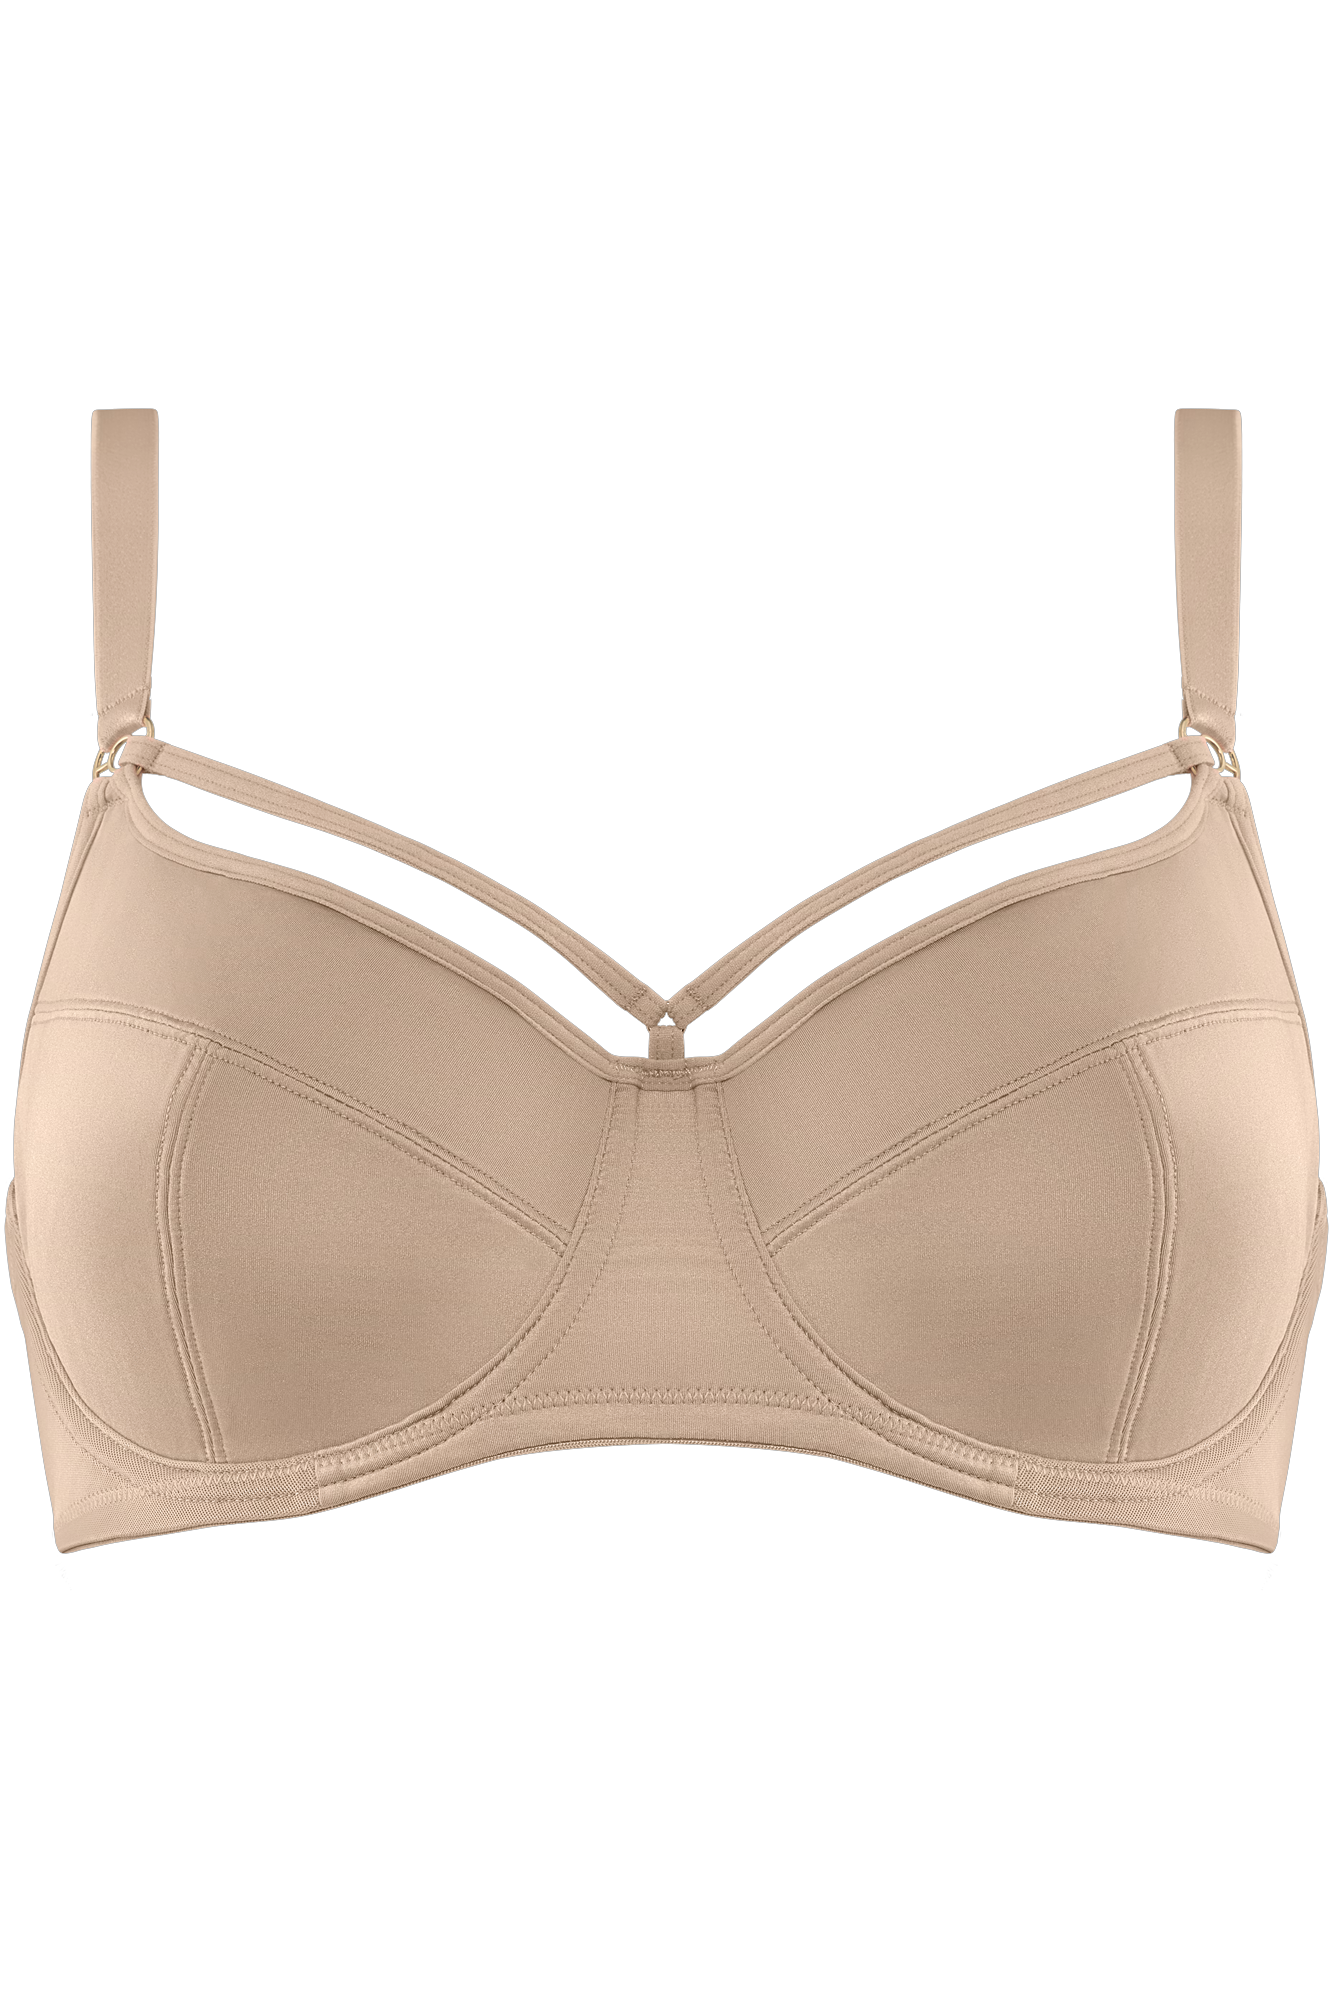 Why Unpadded Bras Are Underrated – Bra Doctor's Blog